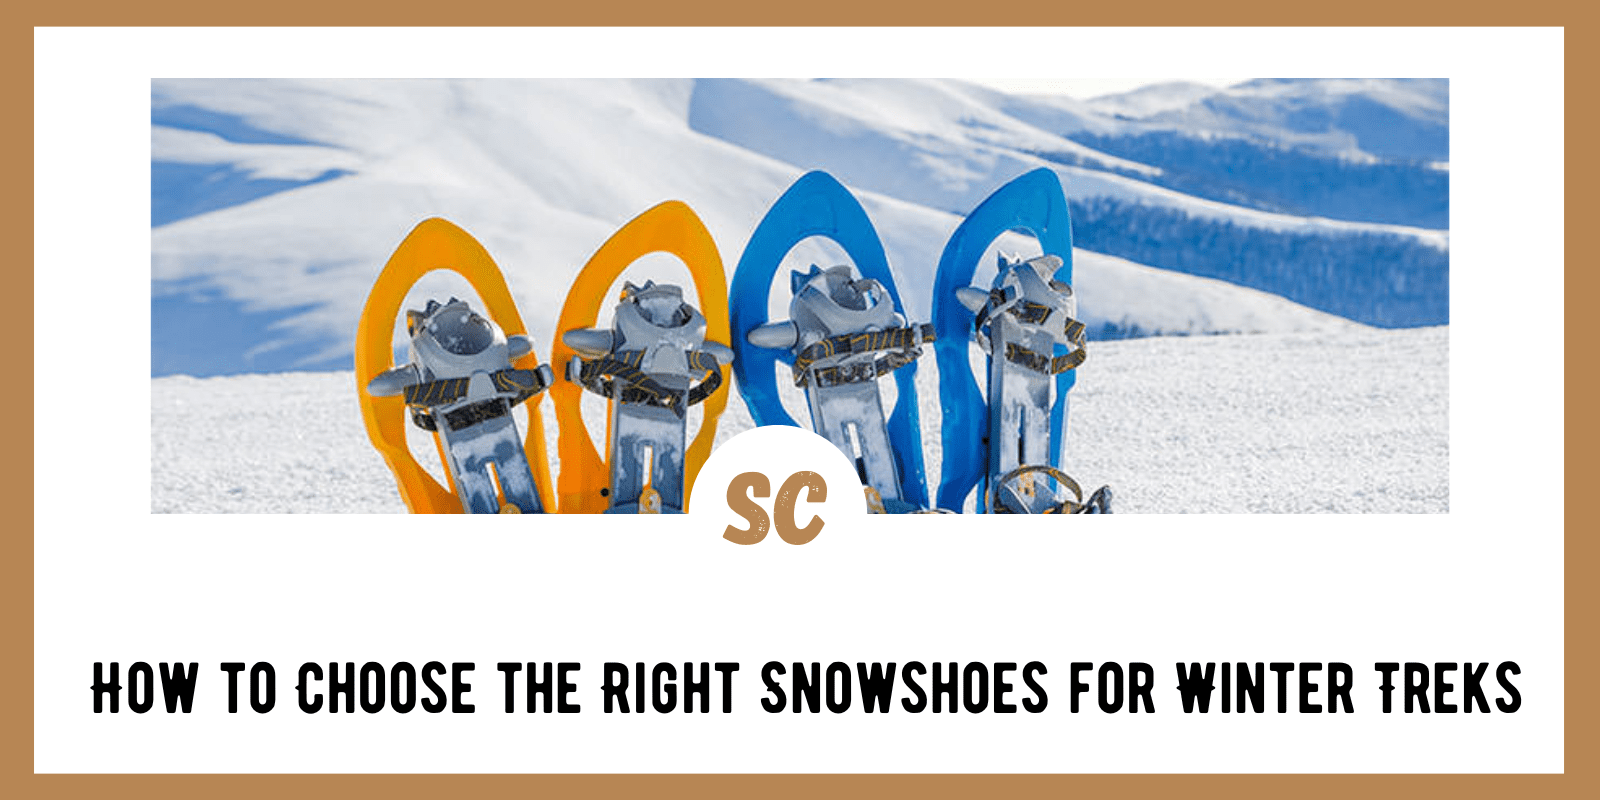 How to Choose the Right Snowshoes for Winter Treks